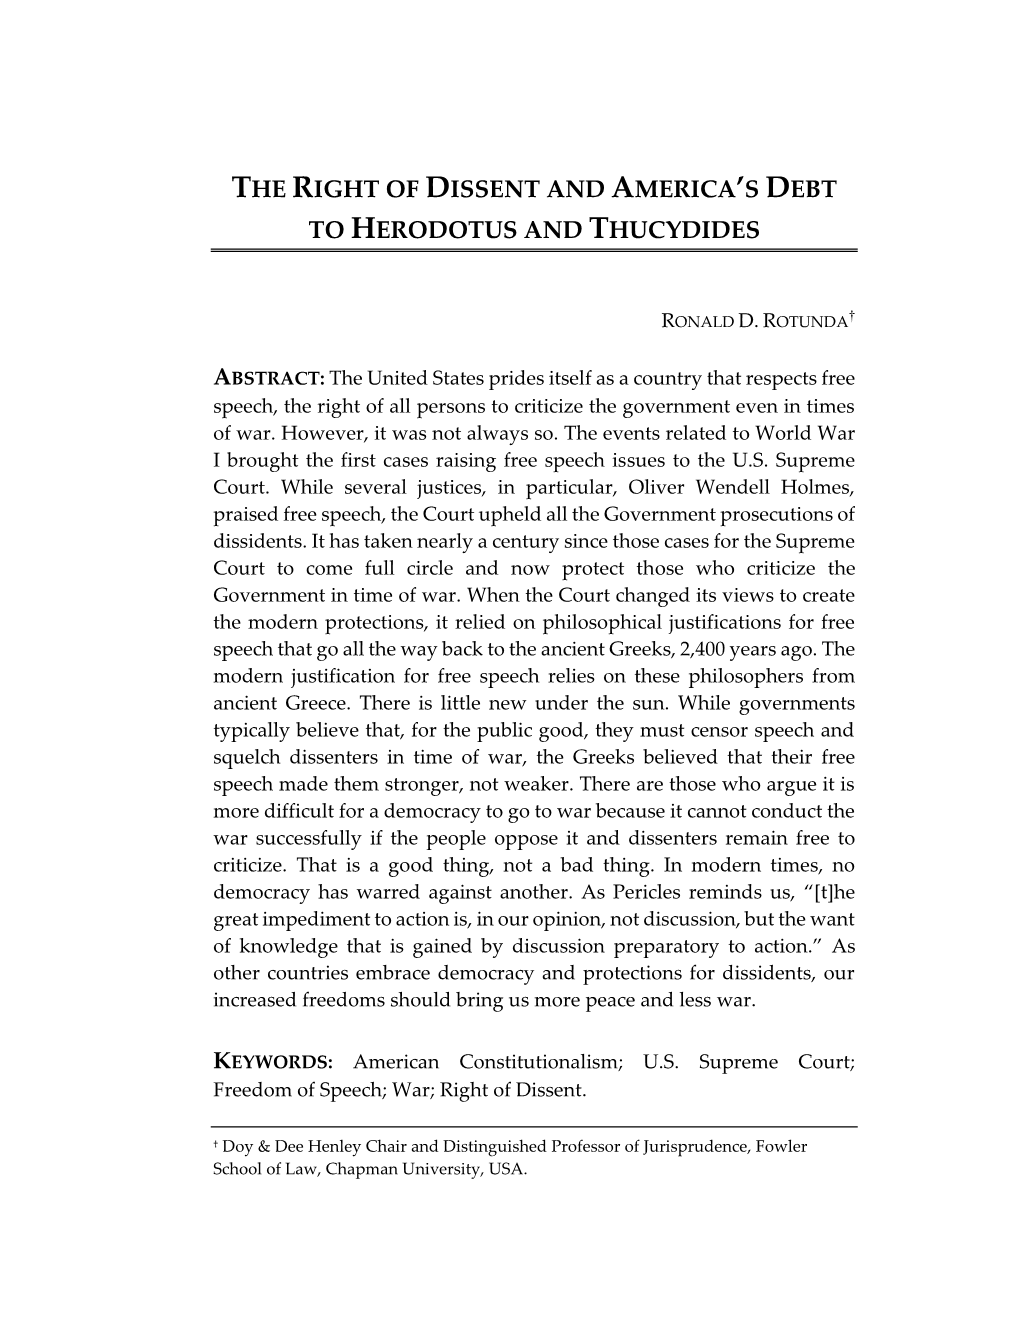 The Right of Dissent and America's Debt To